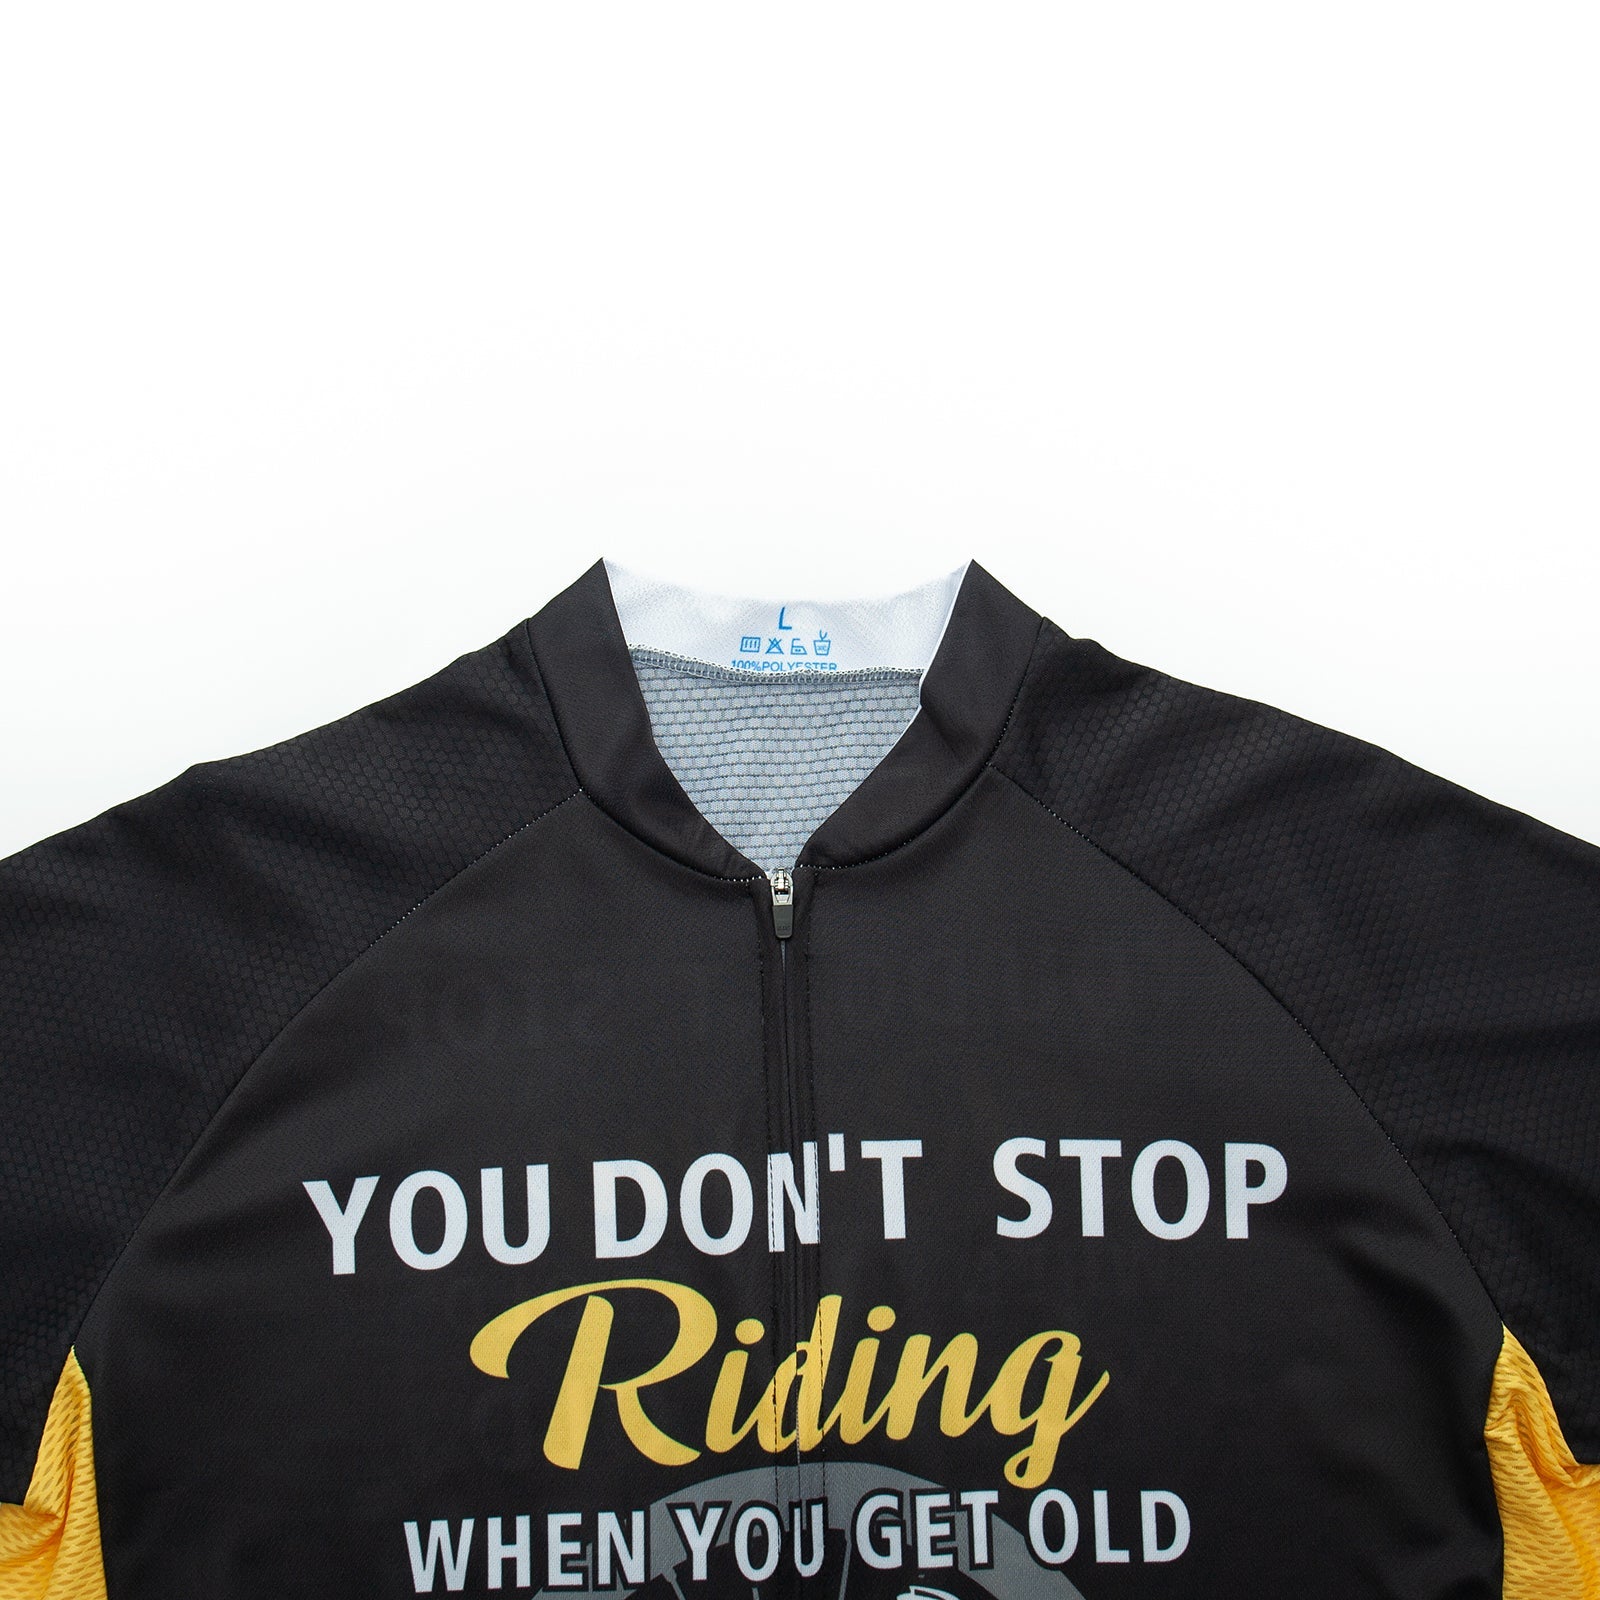 Don't Stop Riding Cycling Jersey Set